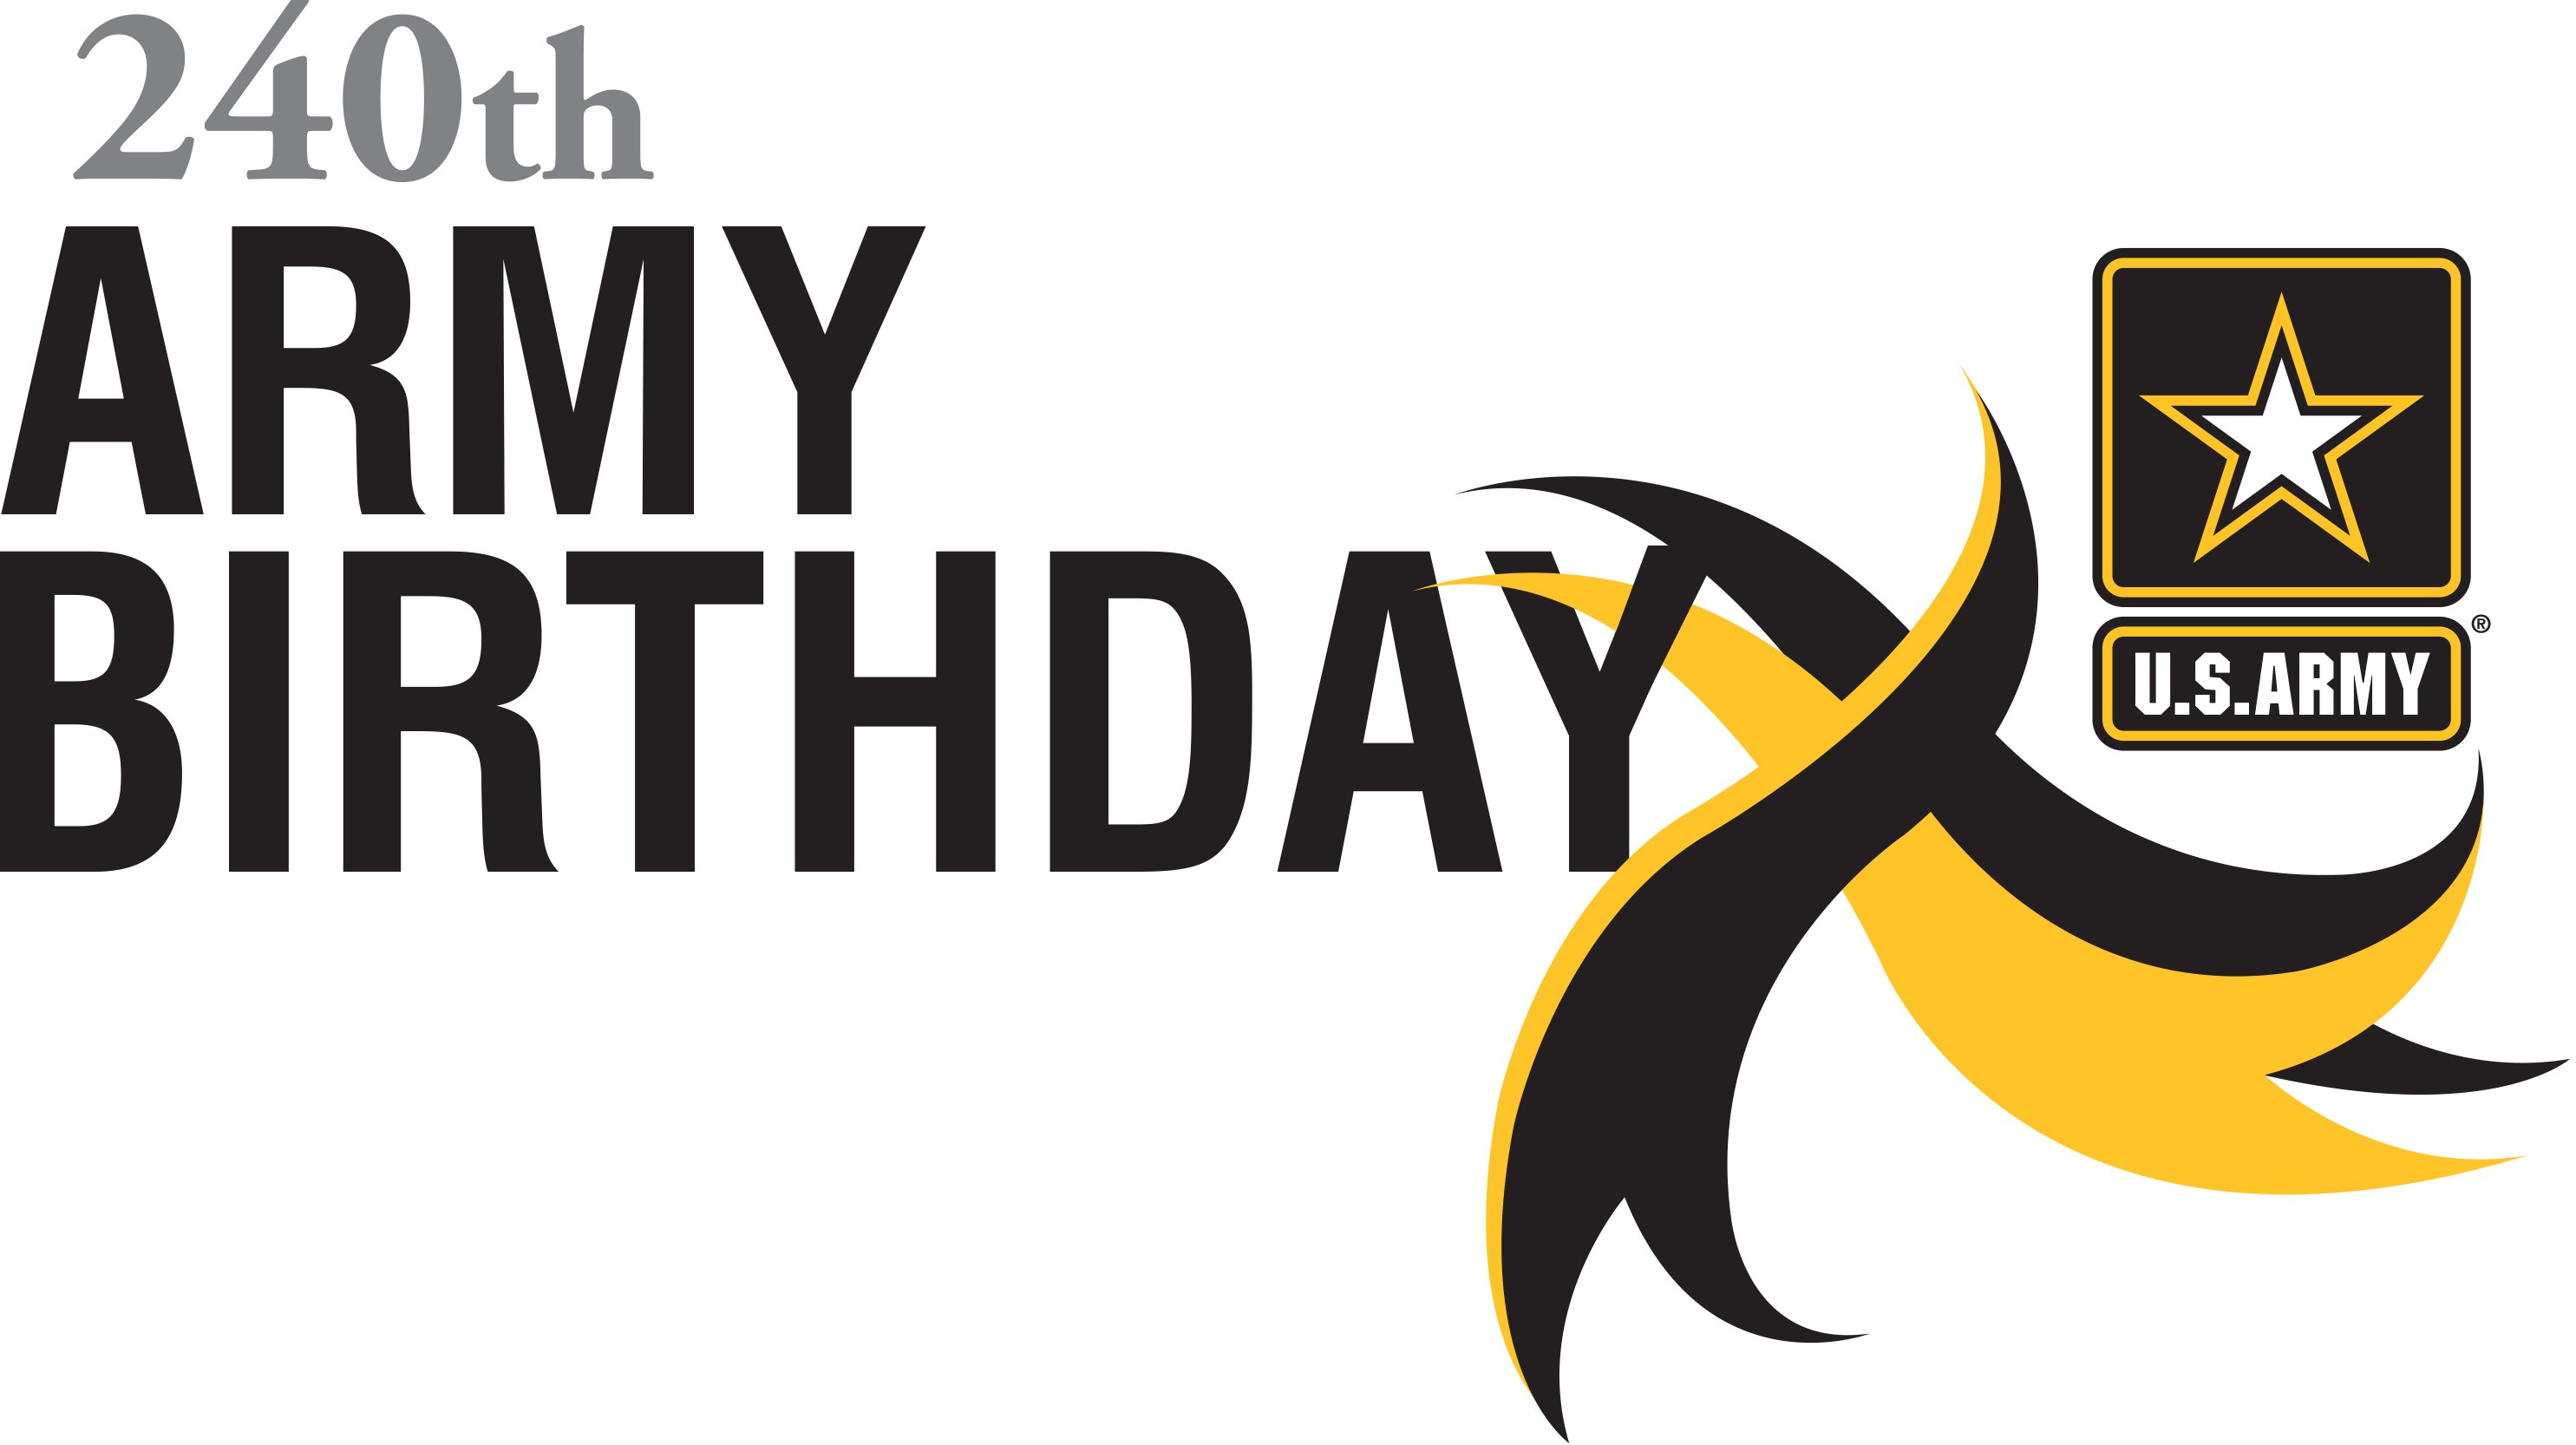 Happy Birthday, U.S. Army! Article The United States Army